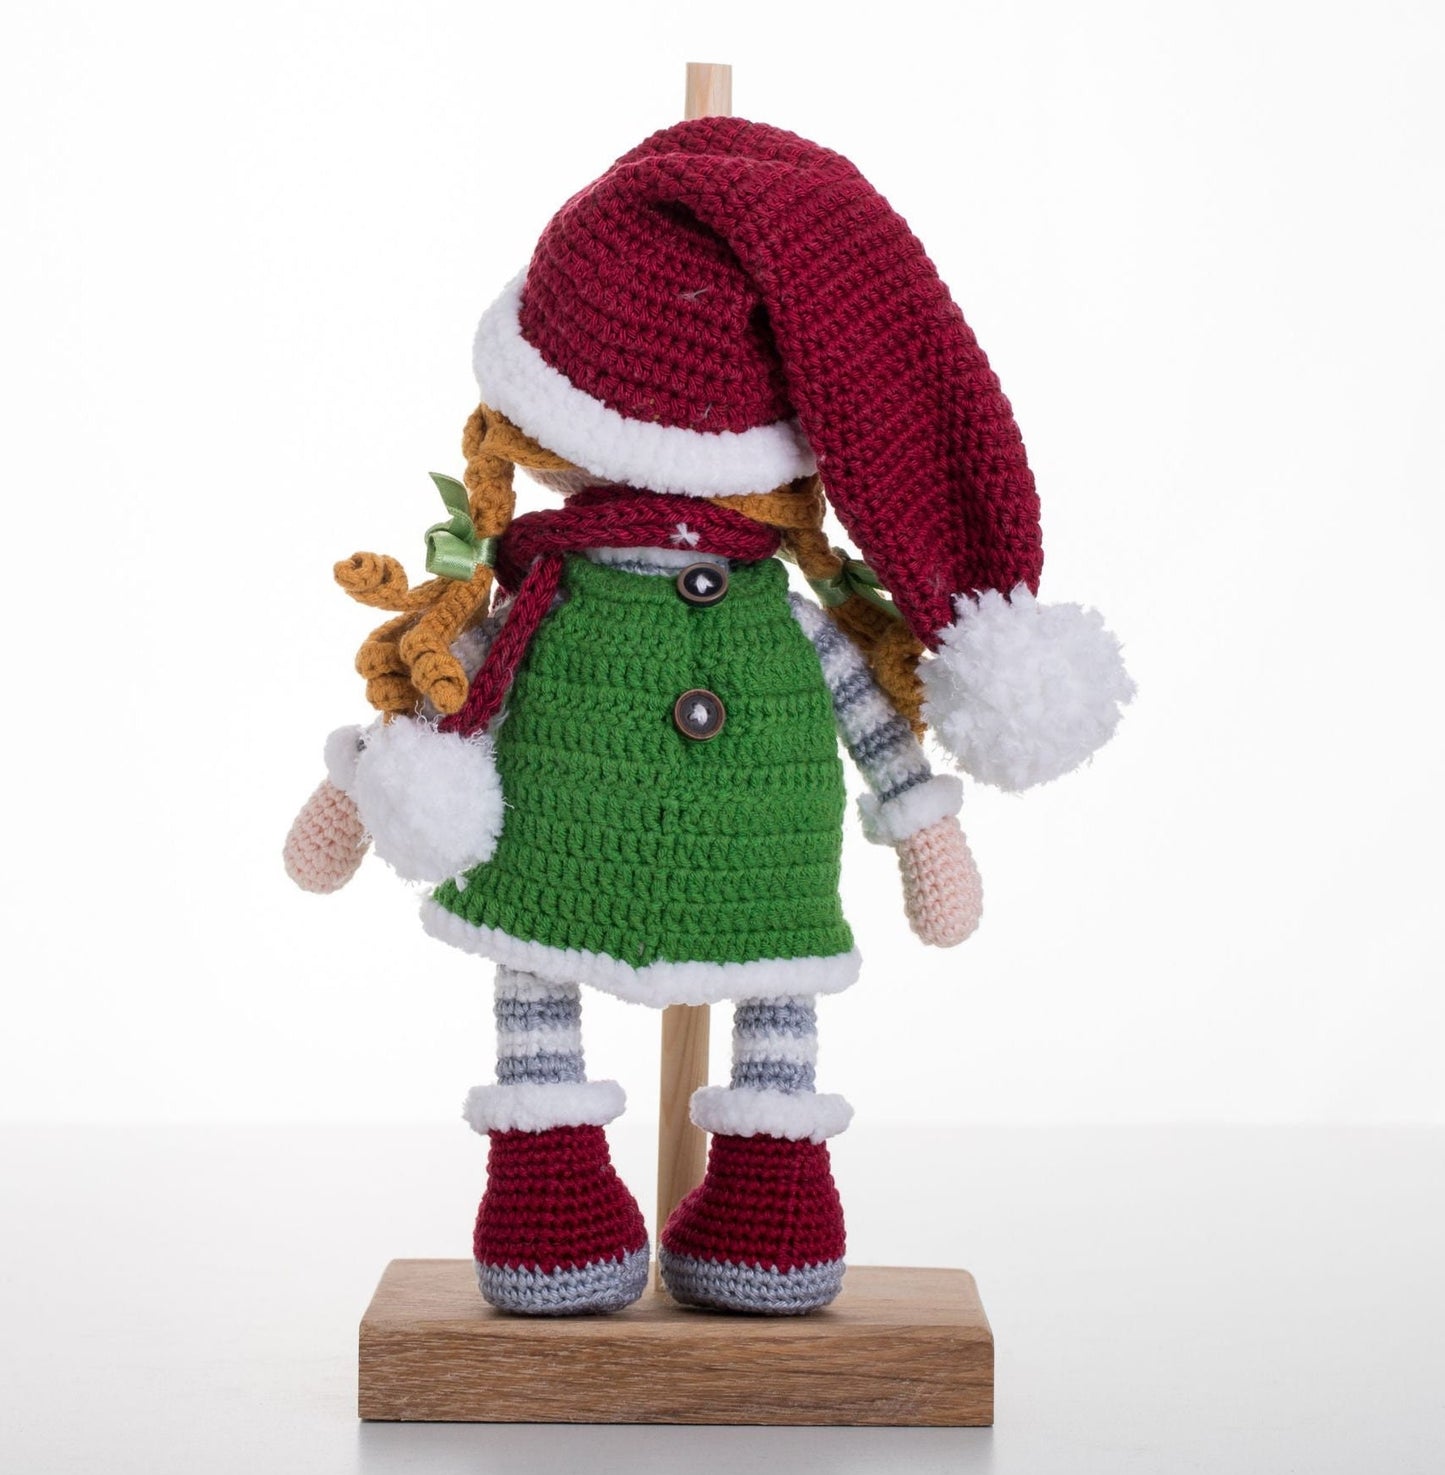 Crochet Doll with Beanie Hat and Scarf, Amigurumi Doll with Christmas Outfit